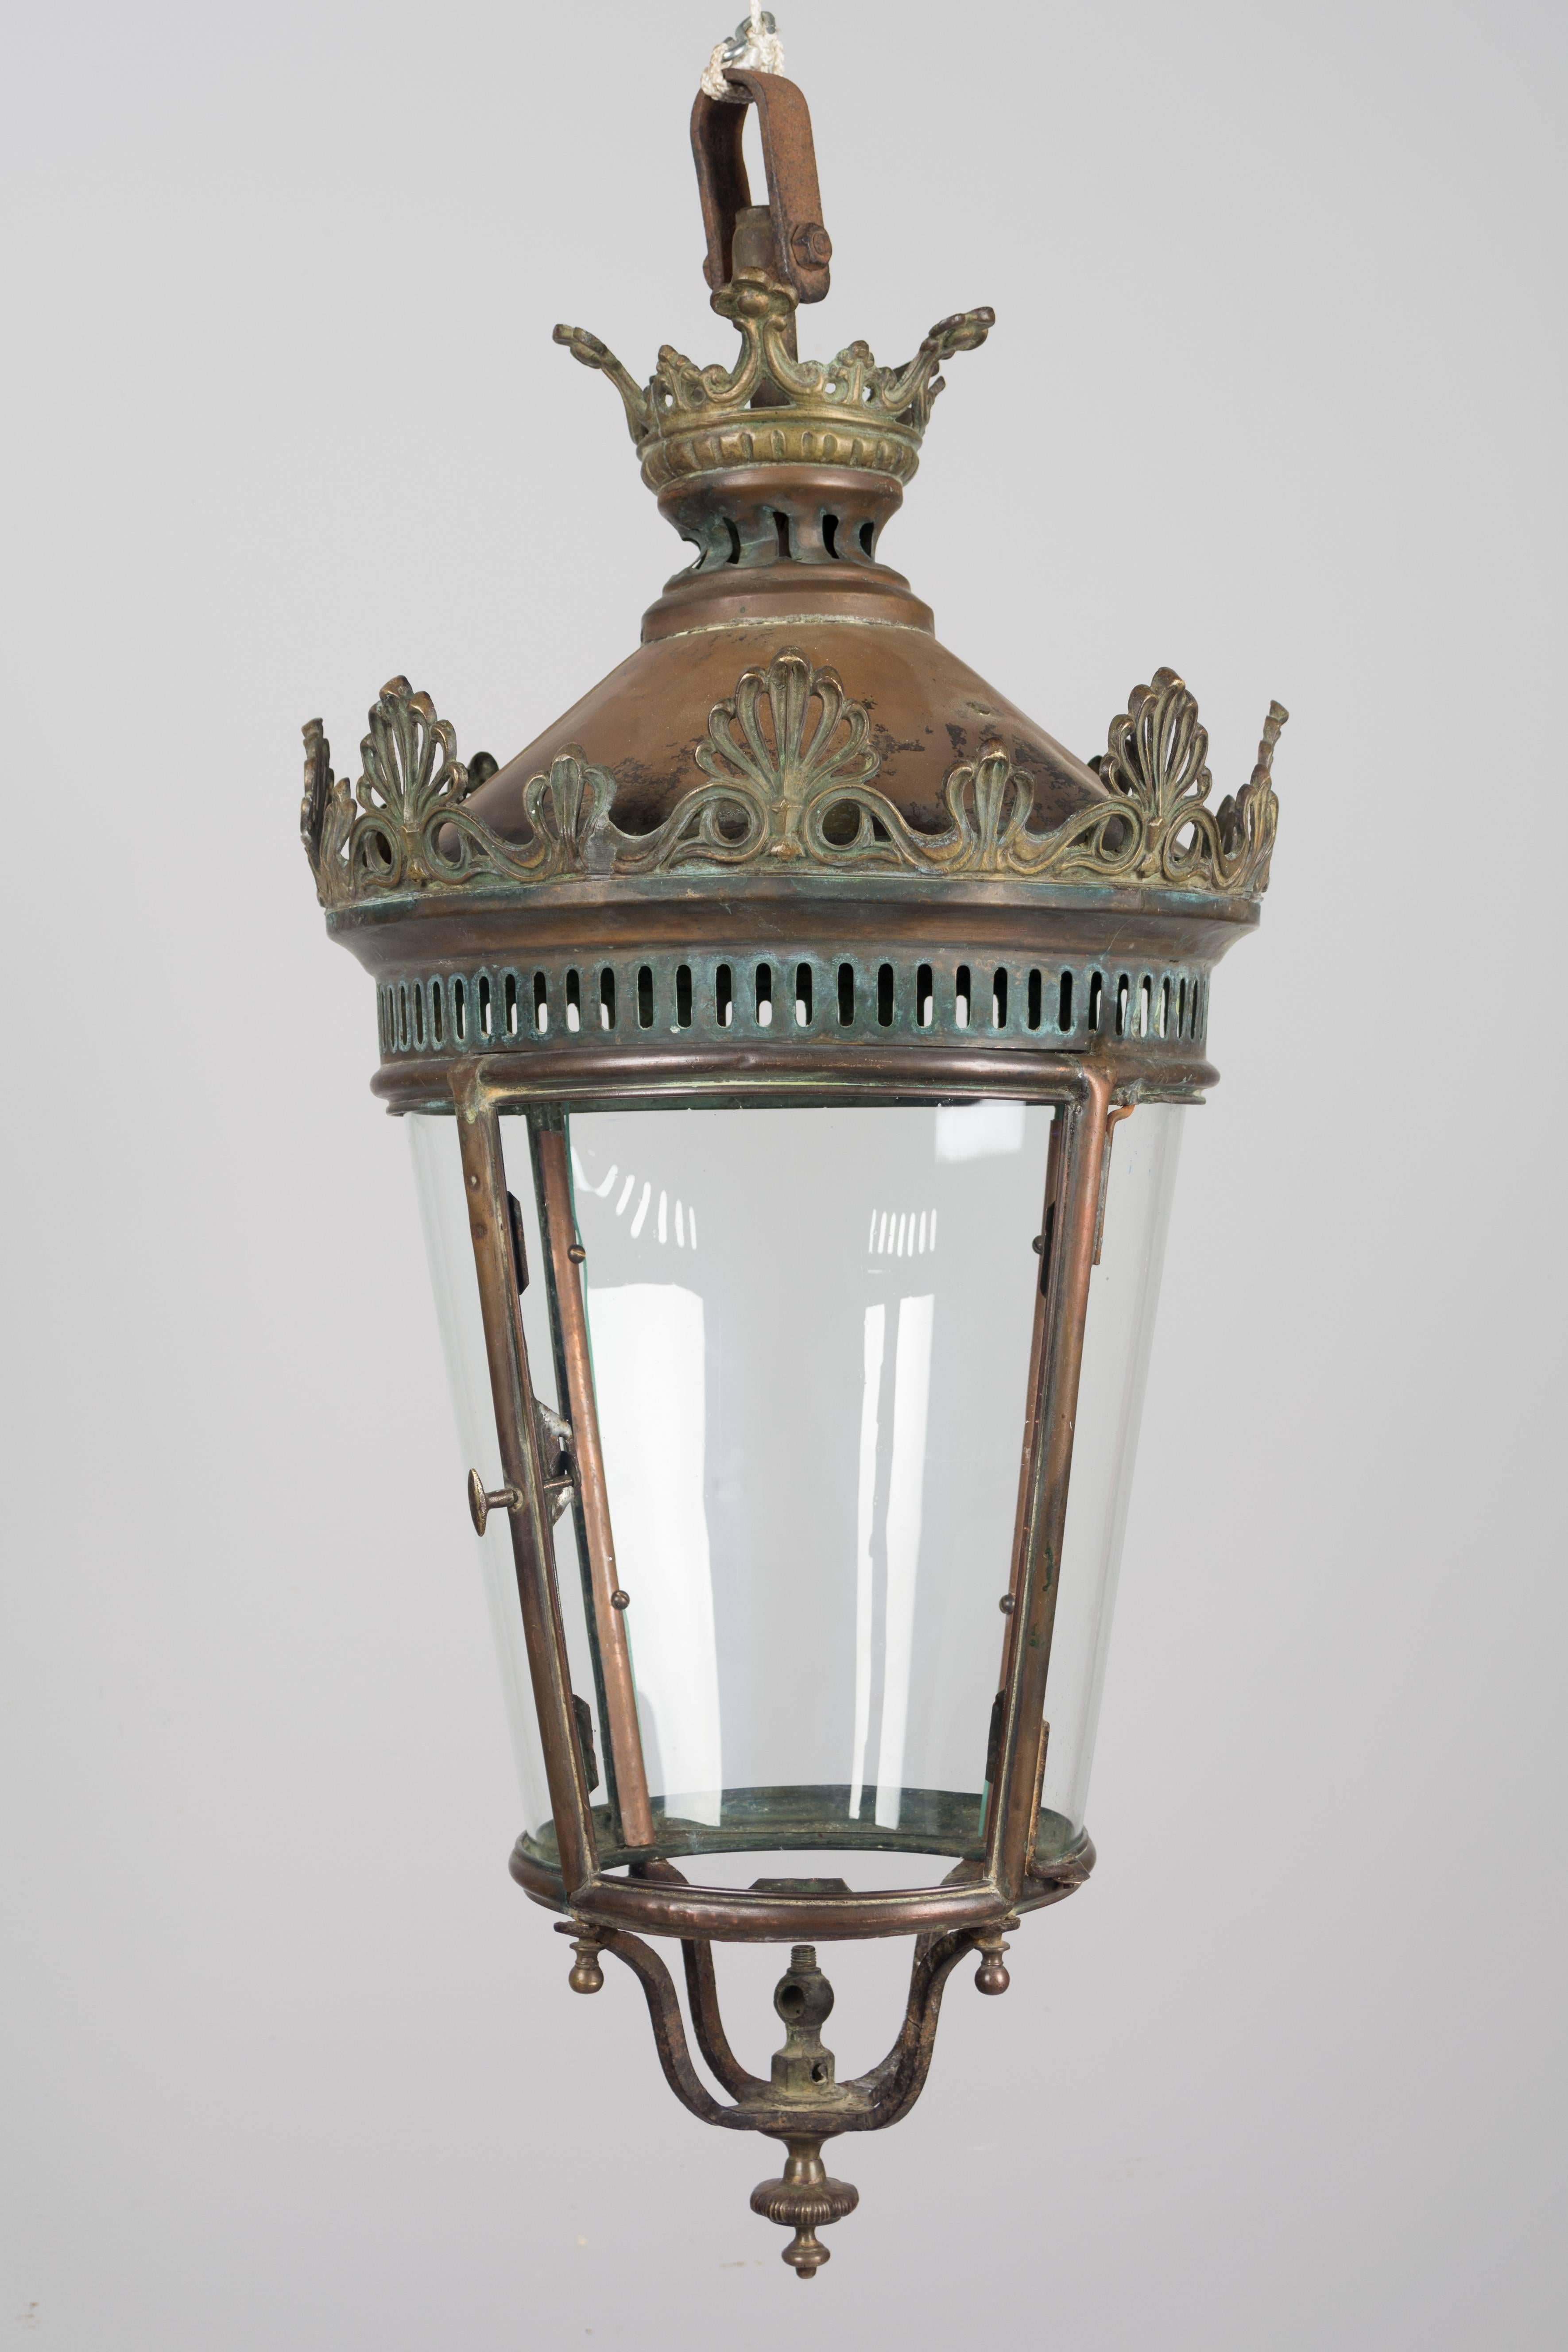 A 19th century French bronze and copper hanging lantern with new handblown curved glass and hinged door. Beautiful old patina. This was once a gas light and may be wired. Overall dimensions including the large loop at the top: 38" H x 16"